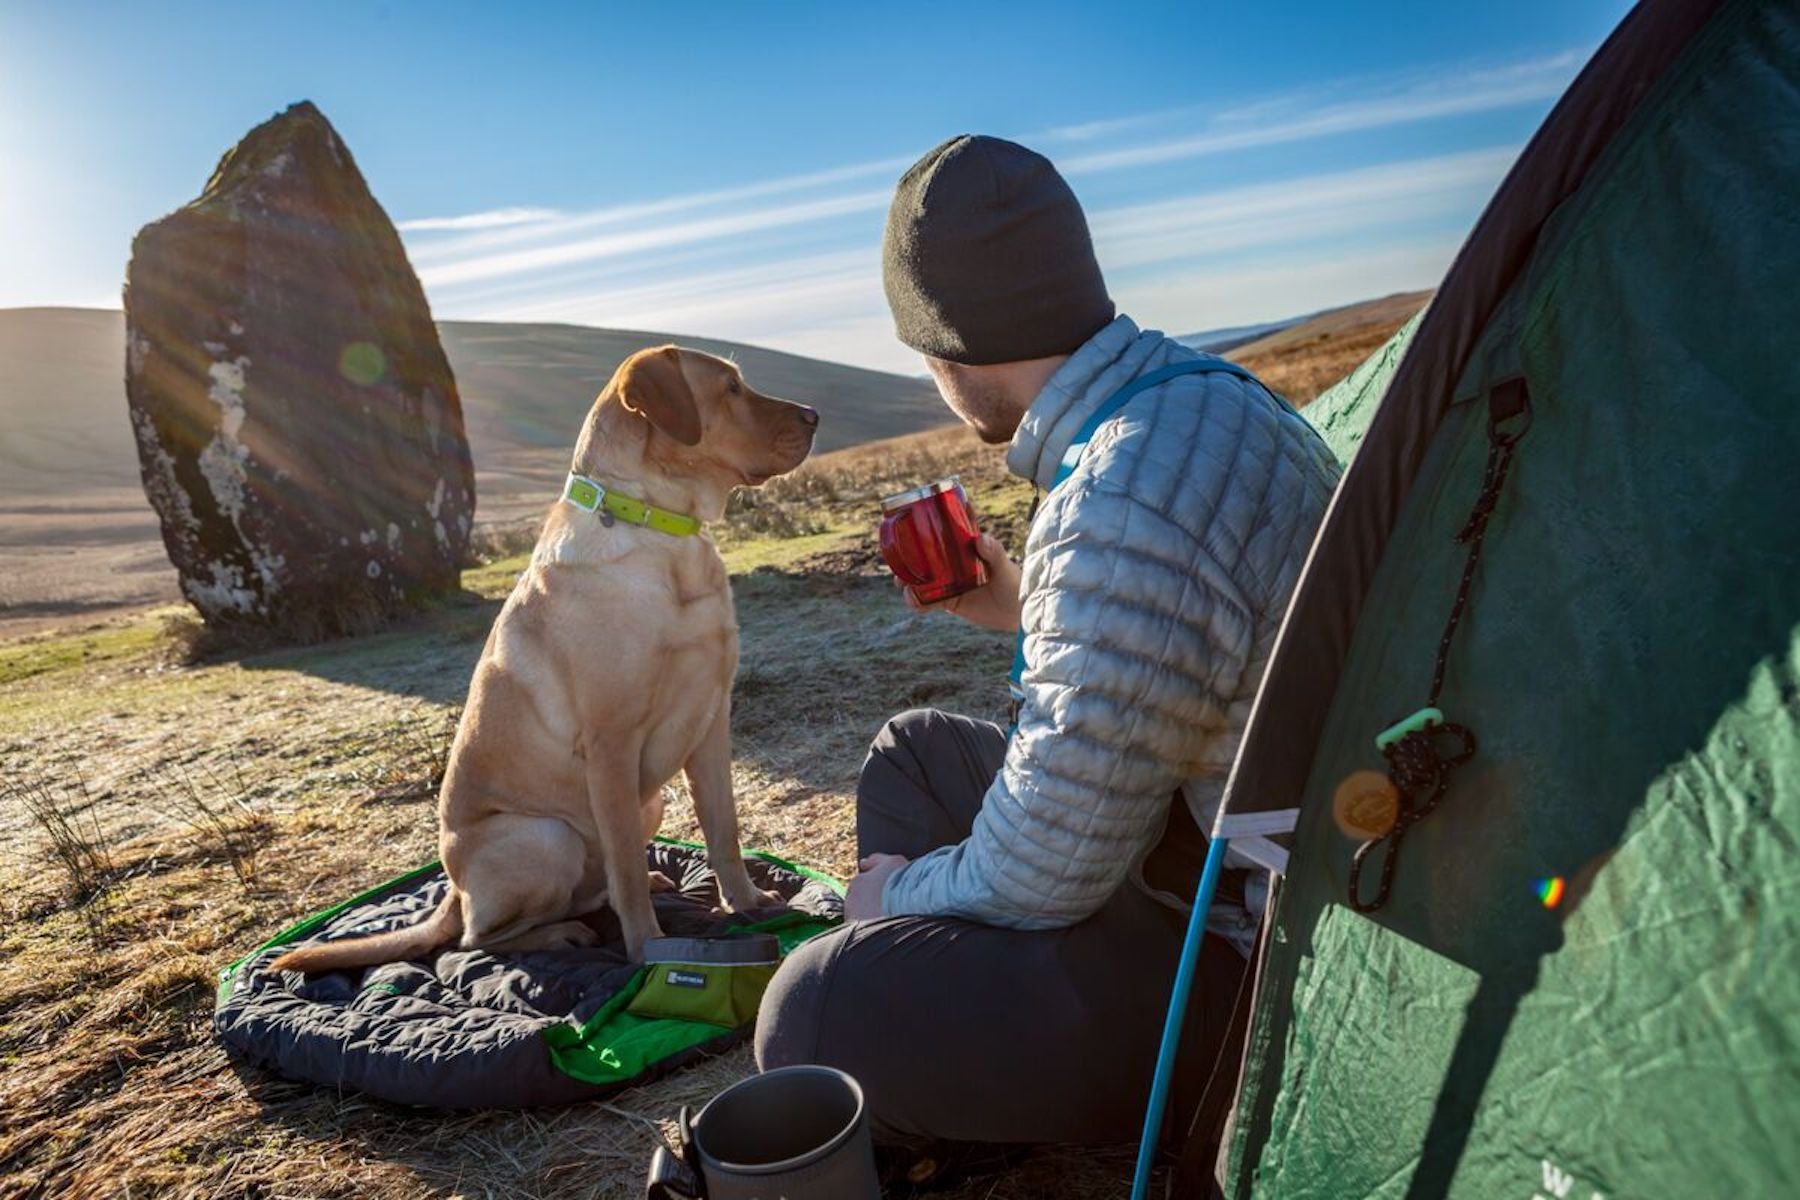 Dog and Human sitting outside their tent